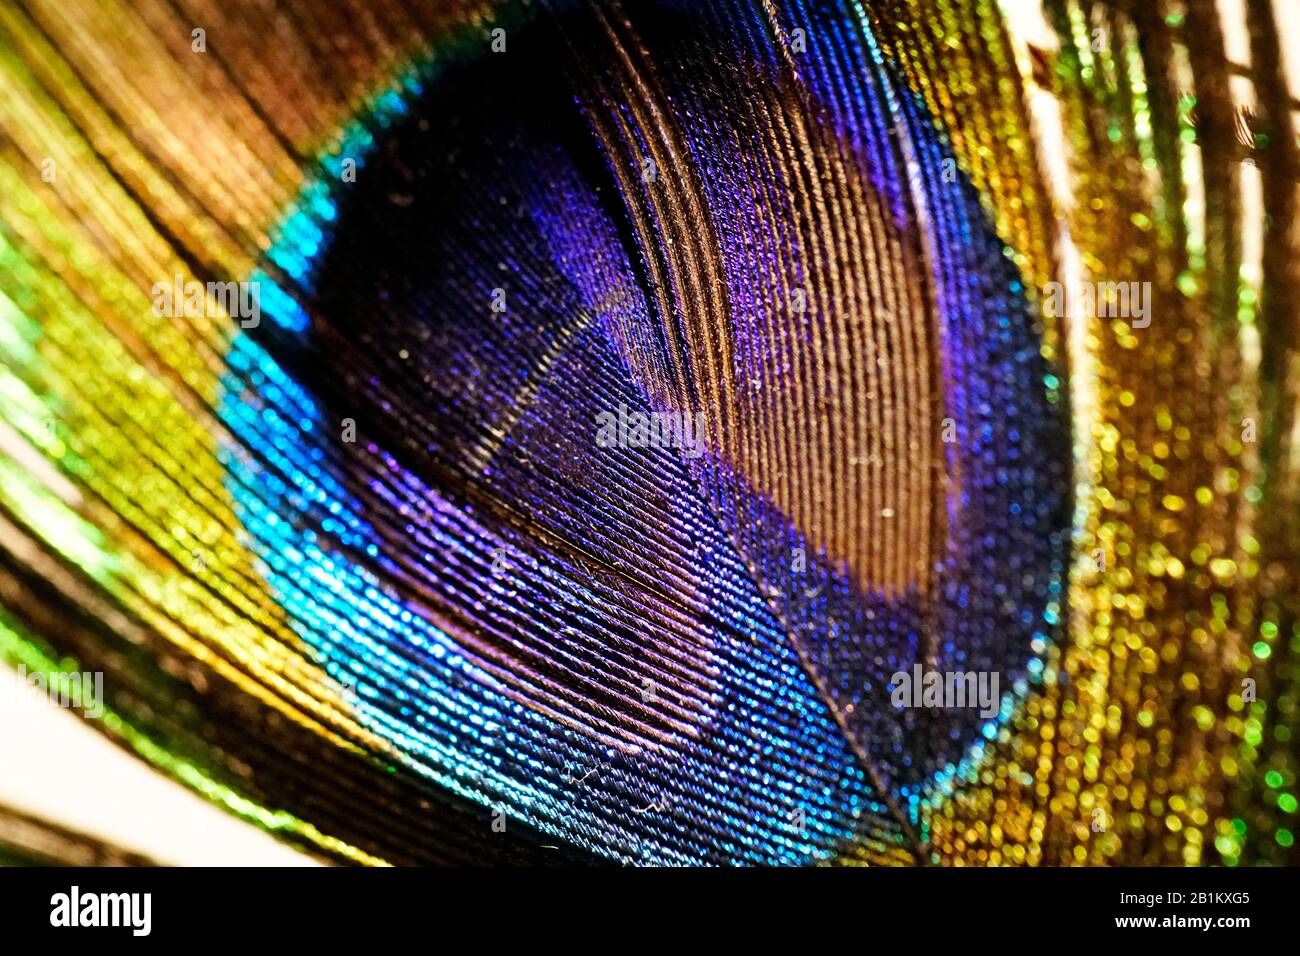 Detail close up of a real peacock feather eye Stock Photo